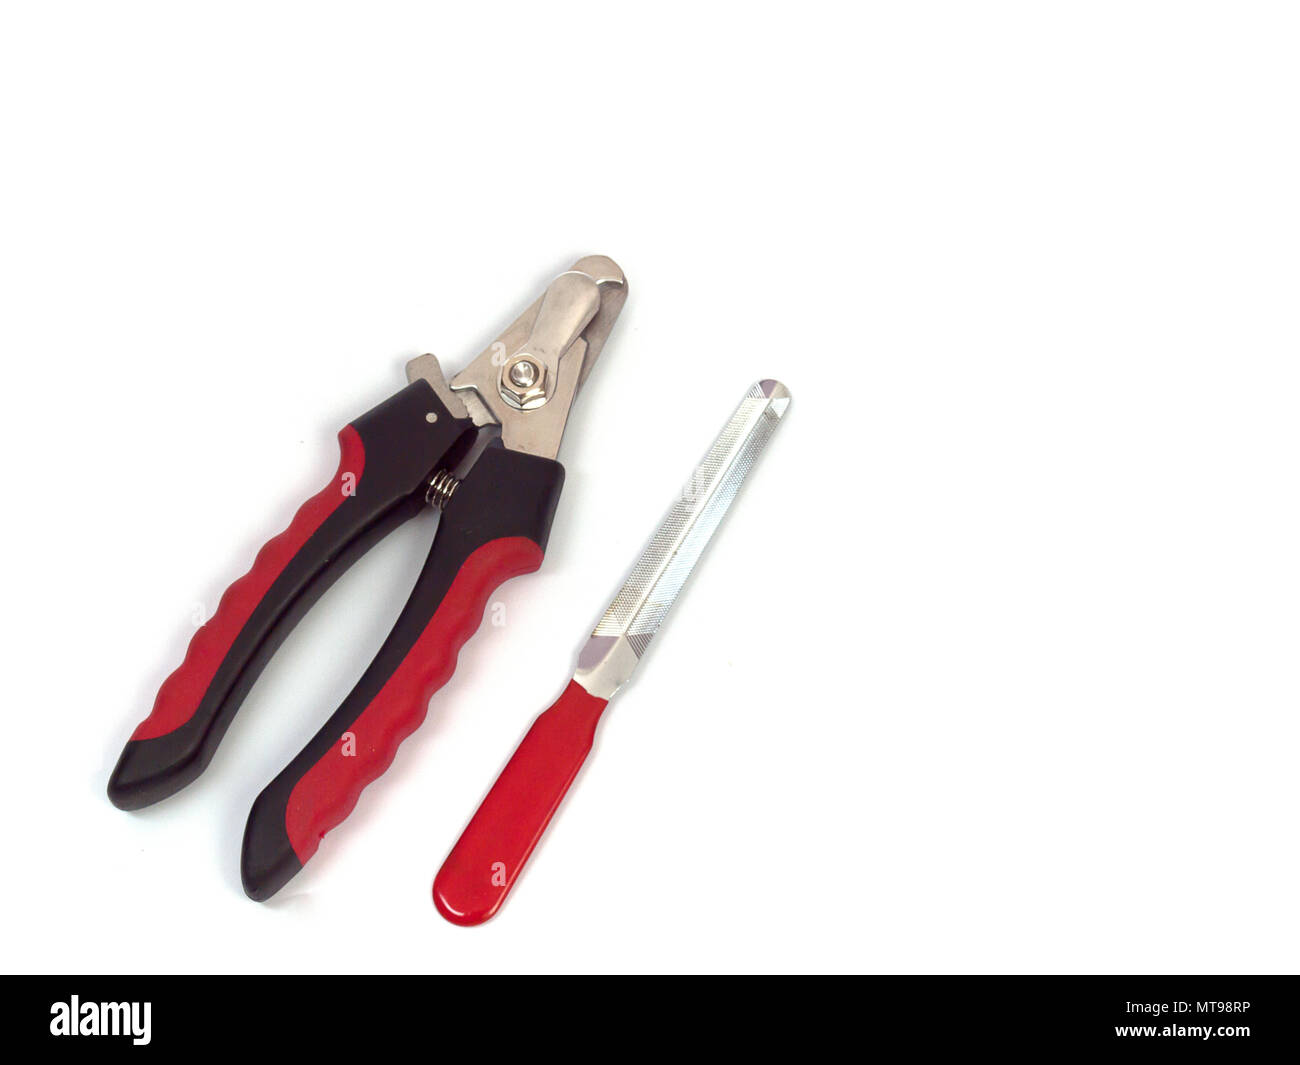 Dog nail clippers , Placed on a white background Stock Photo